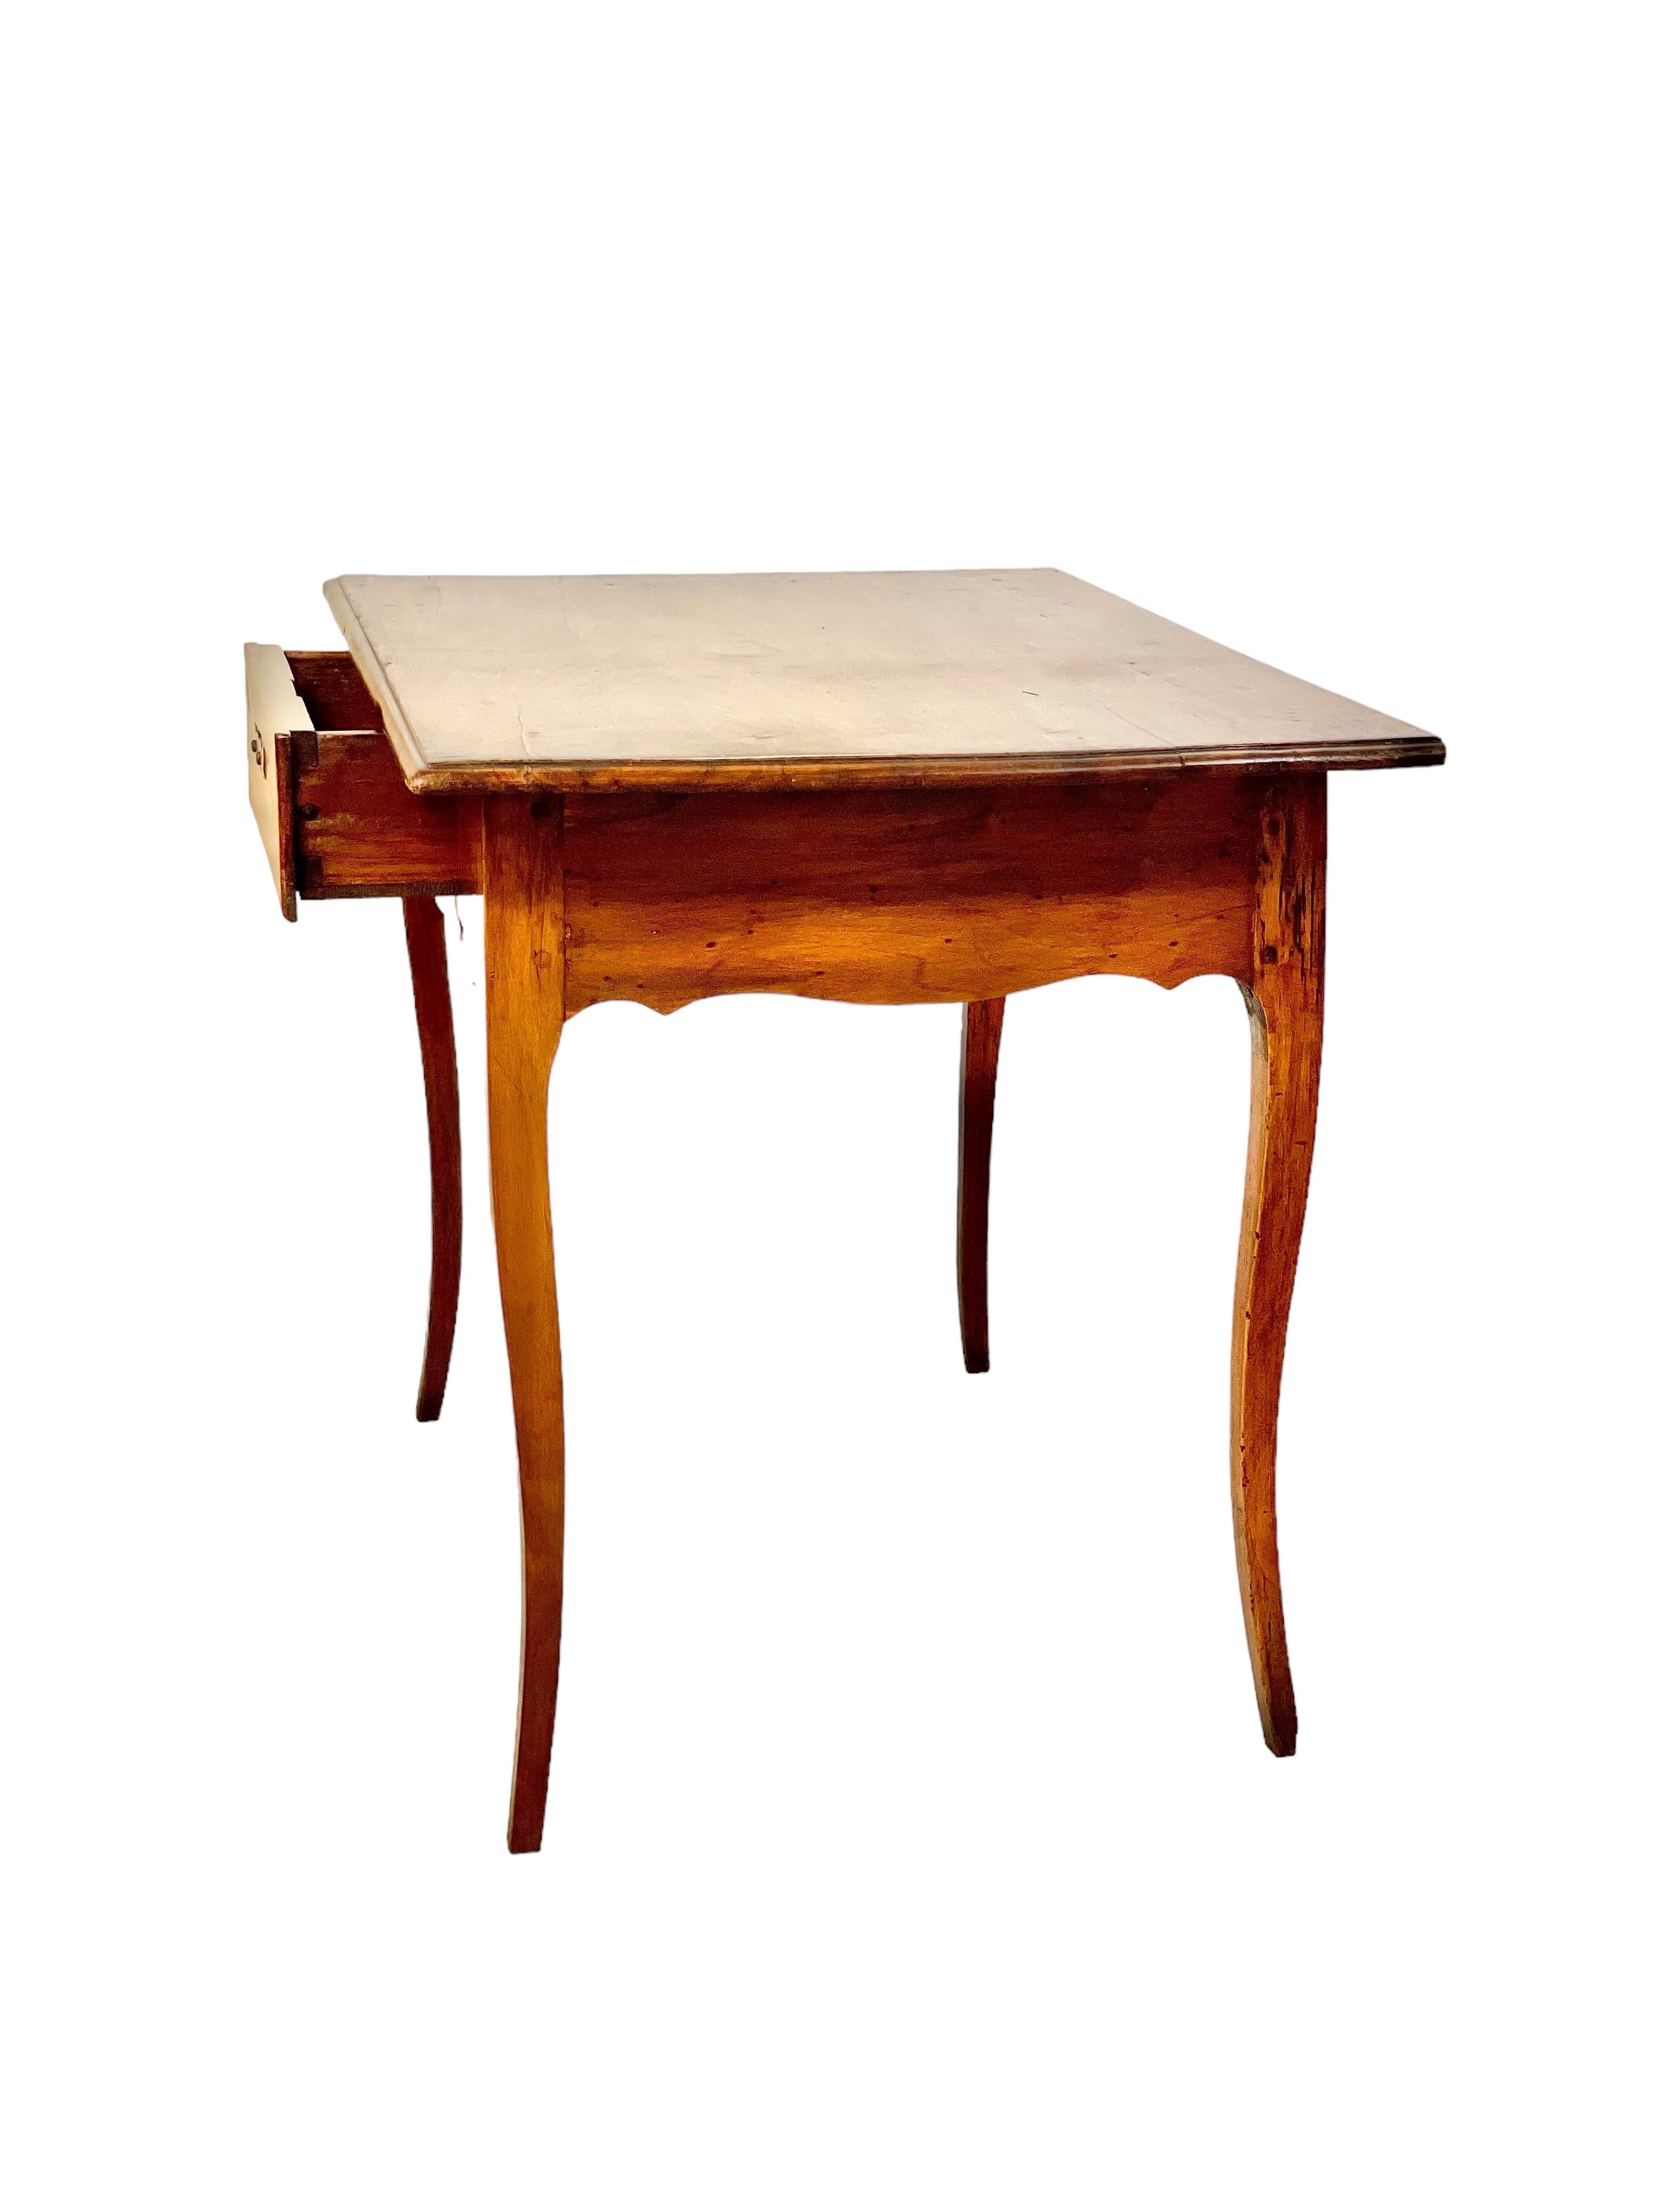 This antique French Louis XV side table, or ladies desk, is a real 18th century gem. Crafted from walnut, and opening with a single apron drawer, it would make a fabulous end table, or small writing desk. Showing plenty of authentic character from